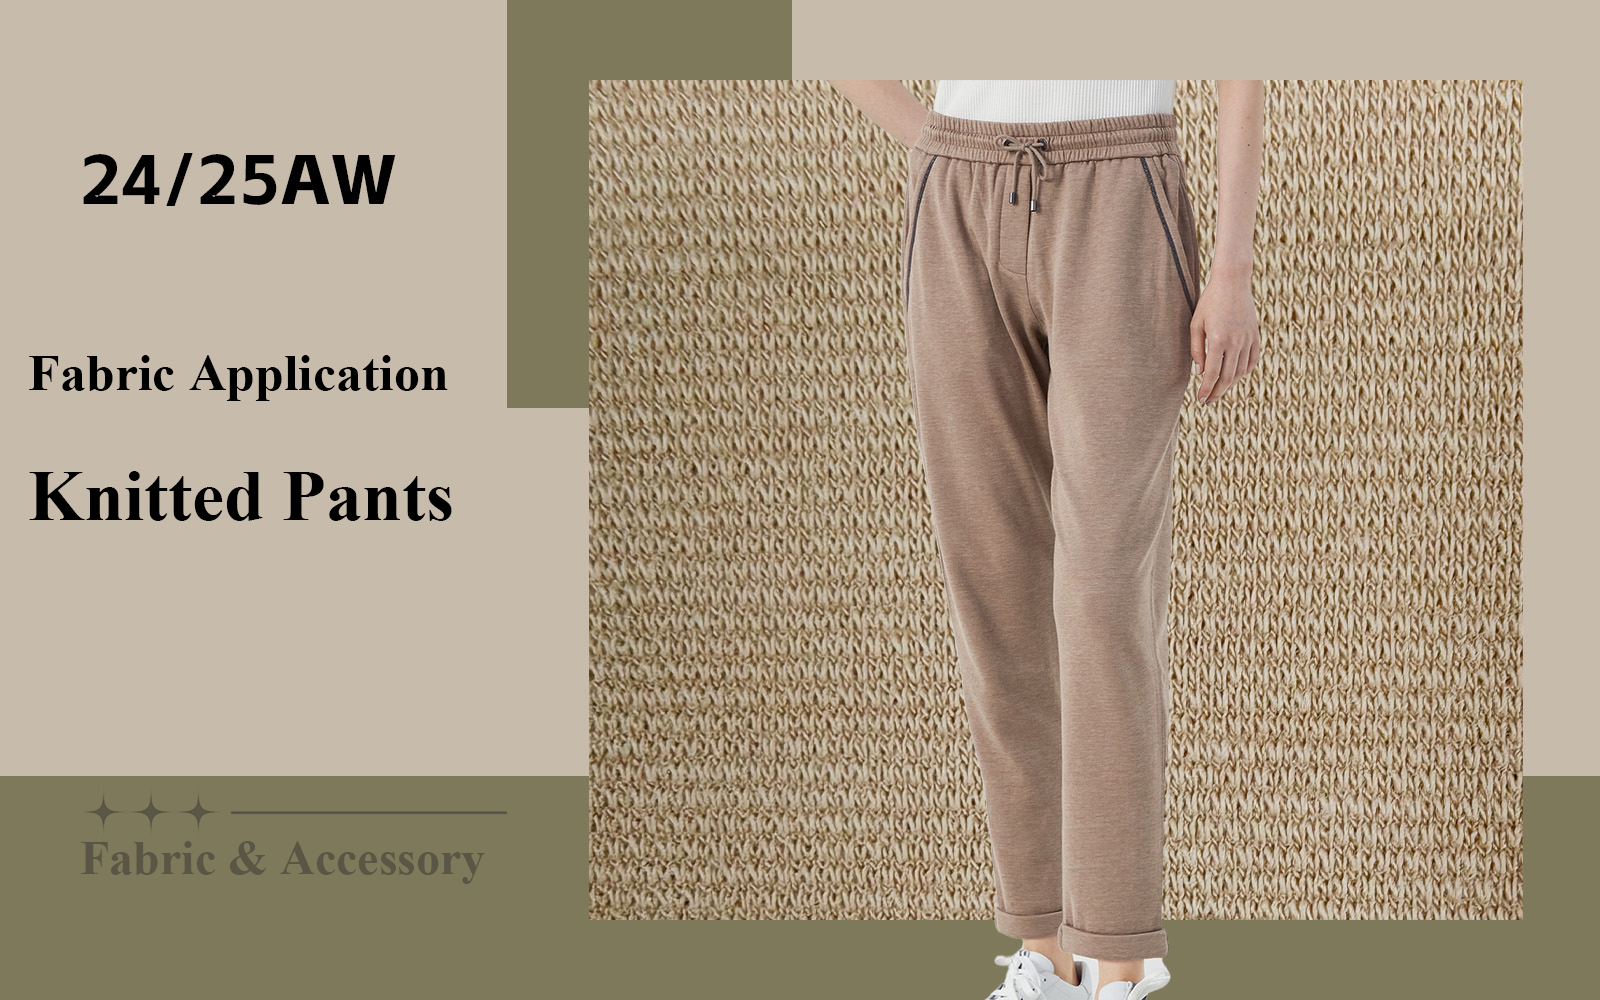 The Fabric Trend for Women's Knitted Pants